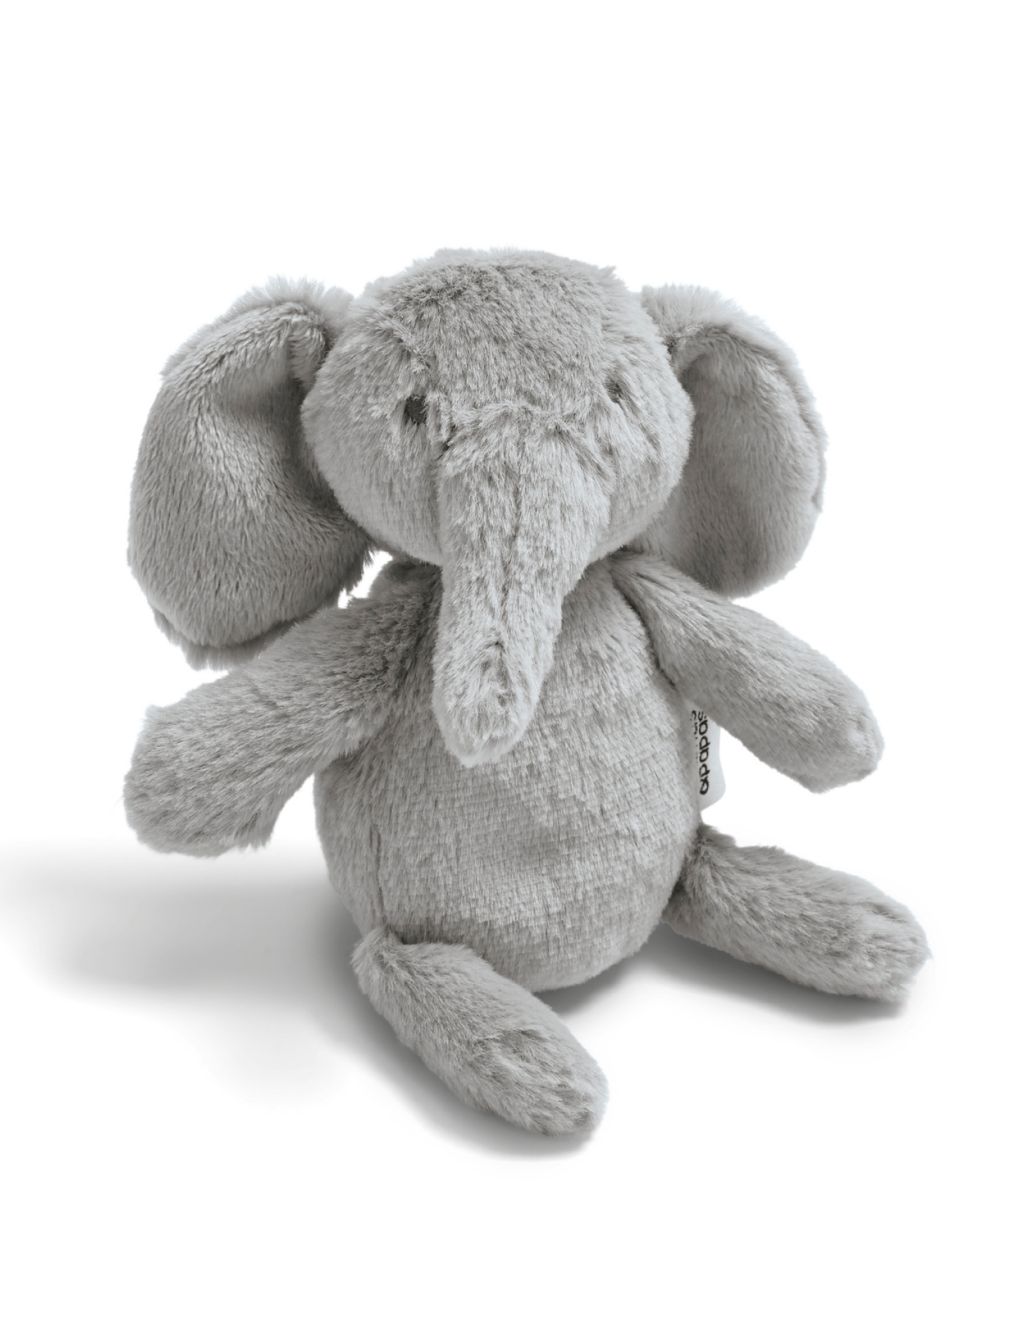 Welcome to the World Small Elephant Soft Toy